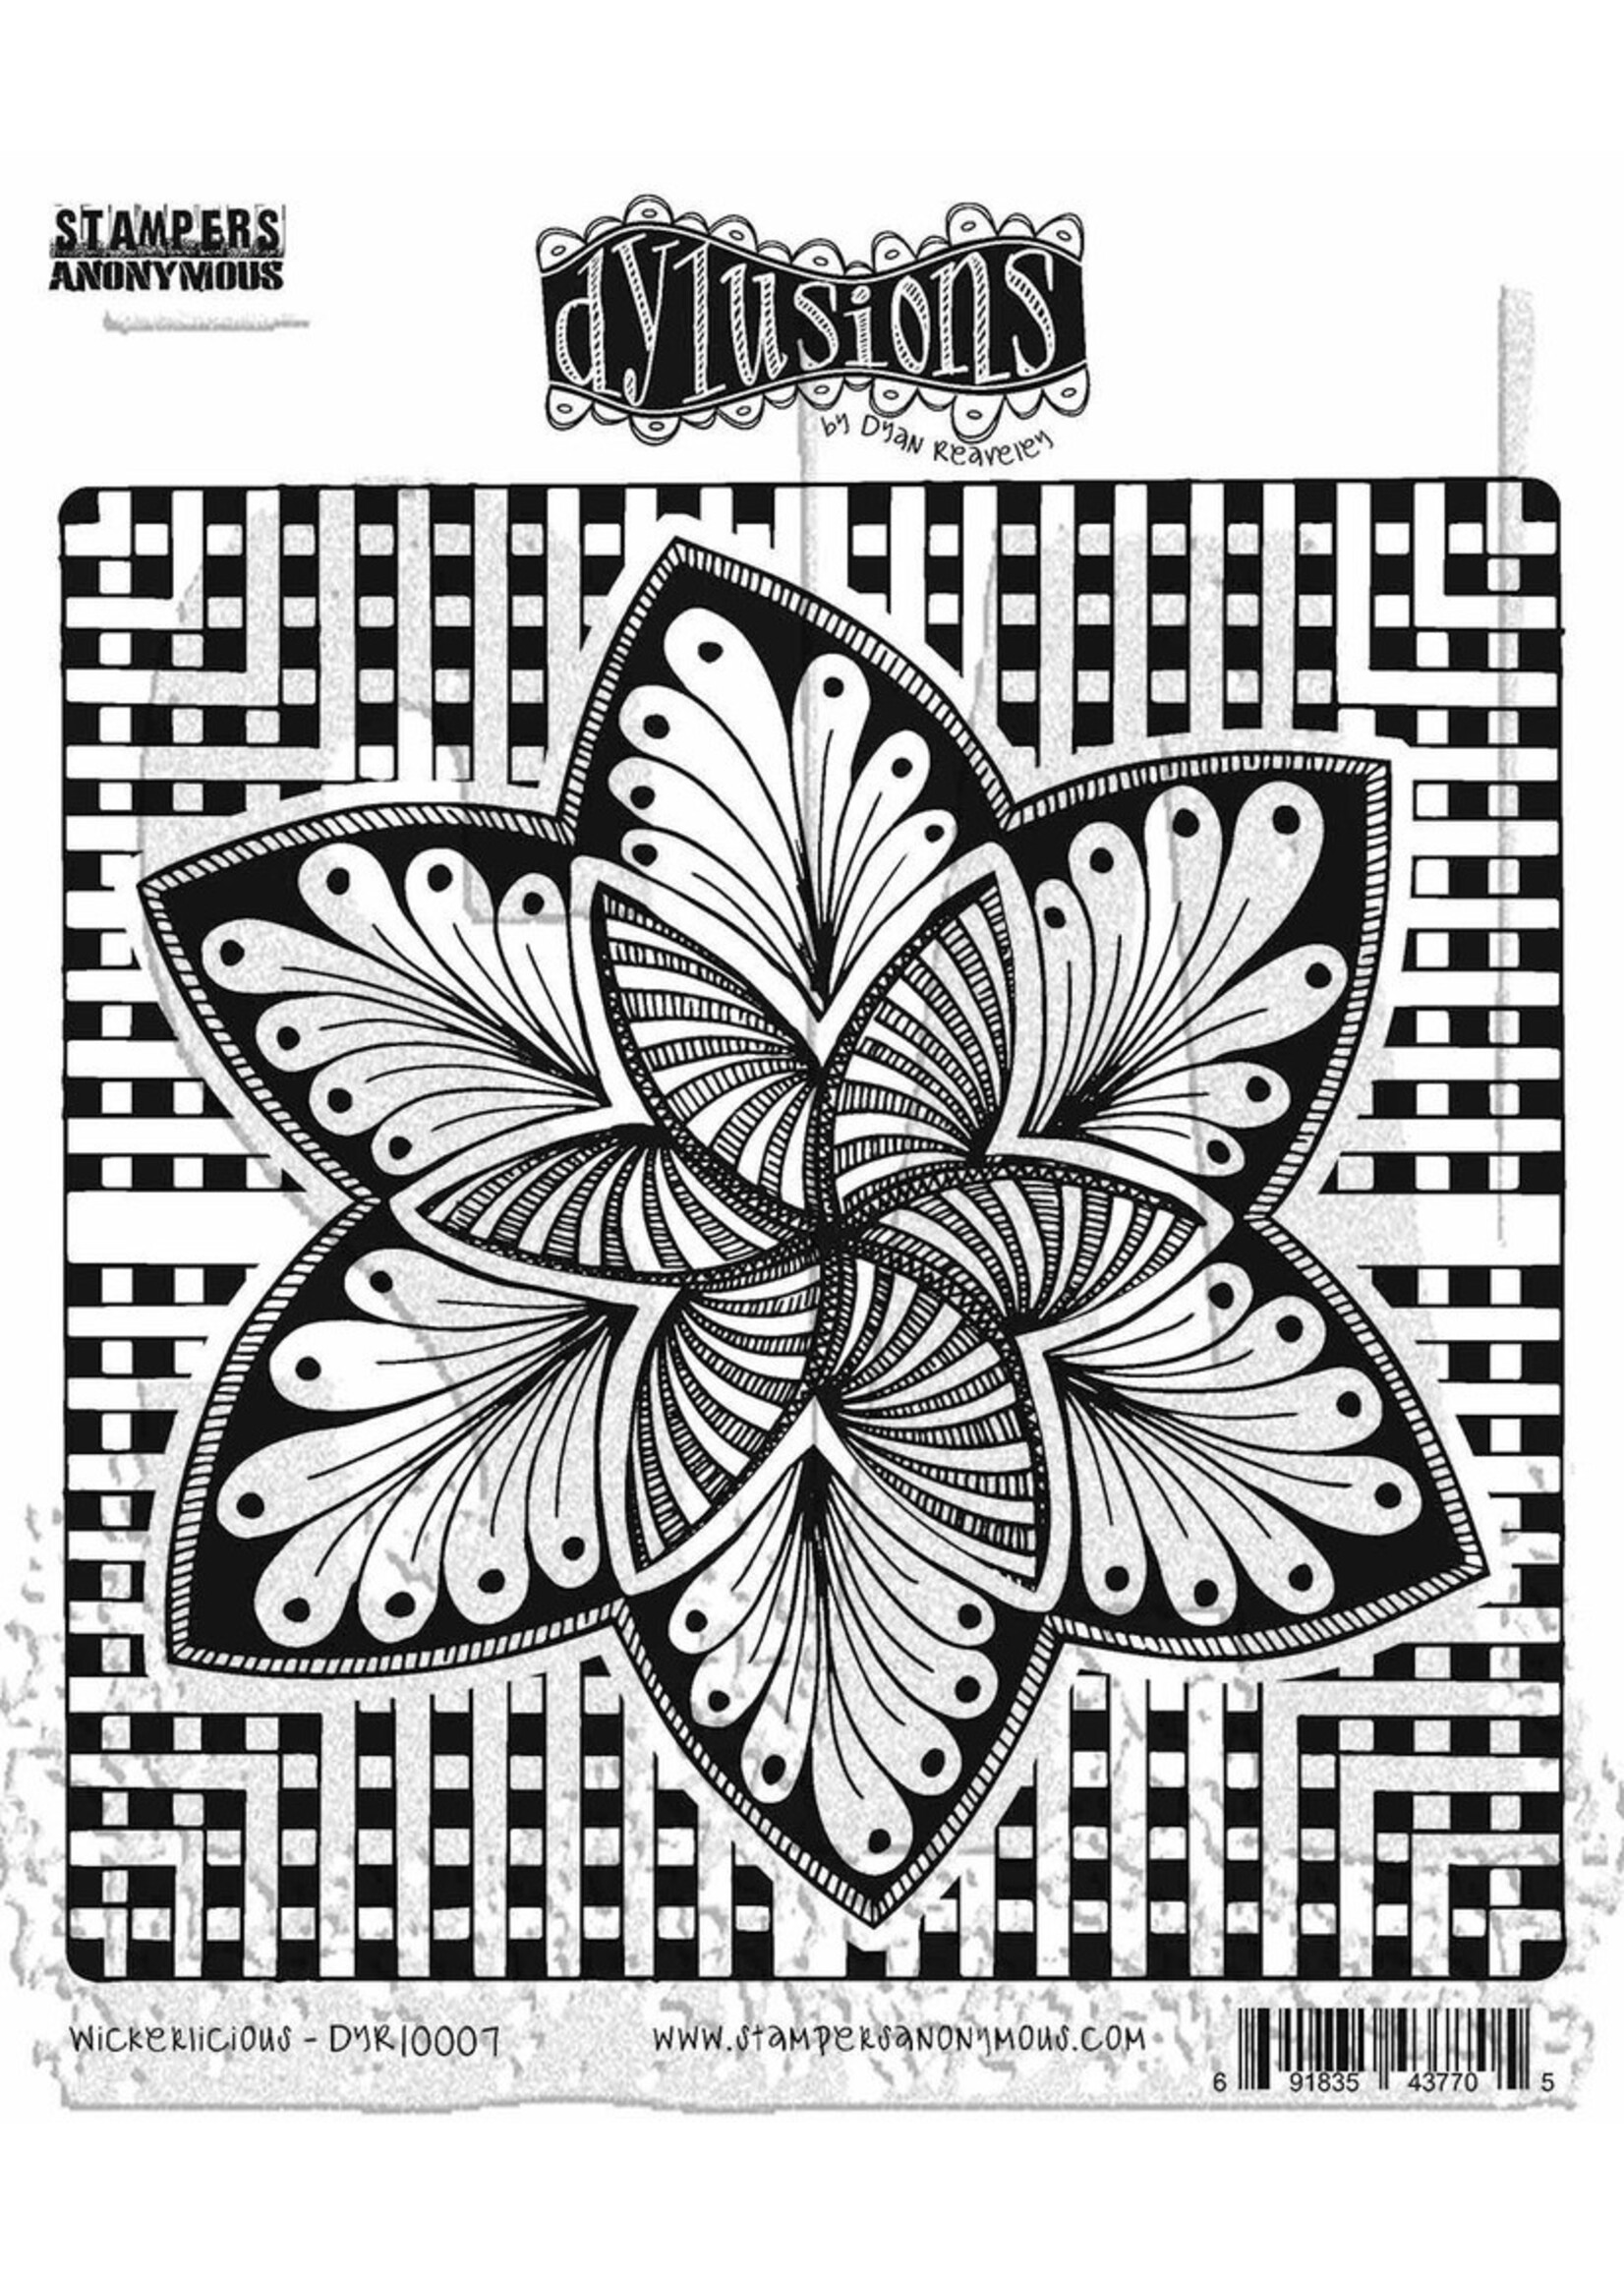 Stampers Anonymous Dylusions Cling Stamp, Wickerlicious